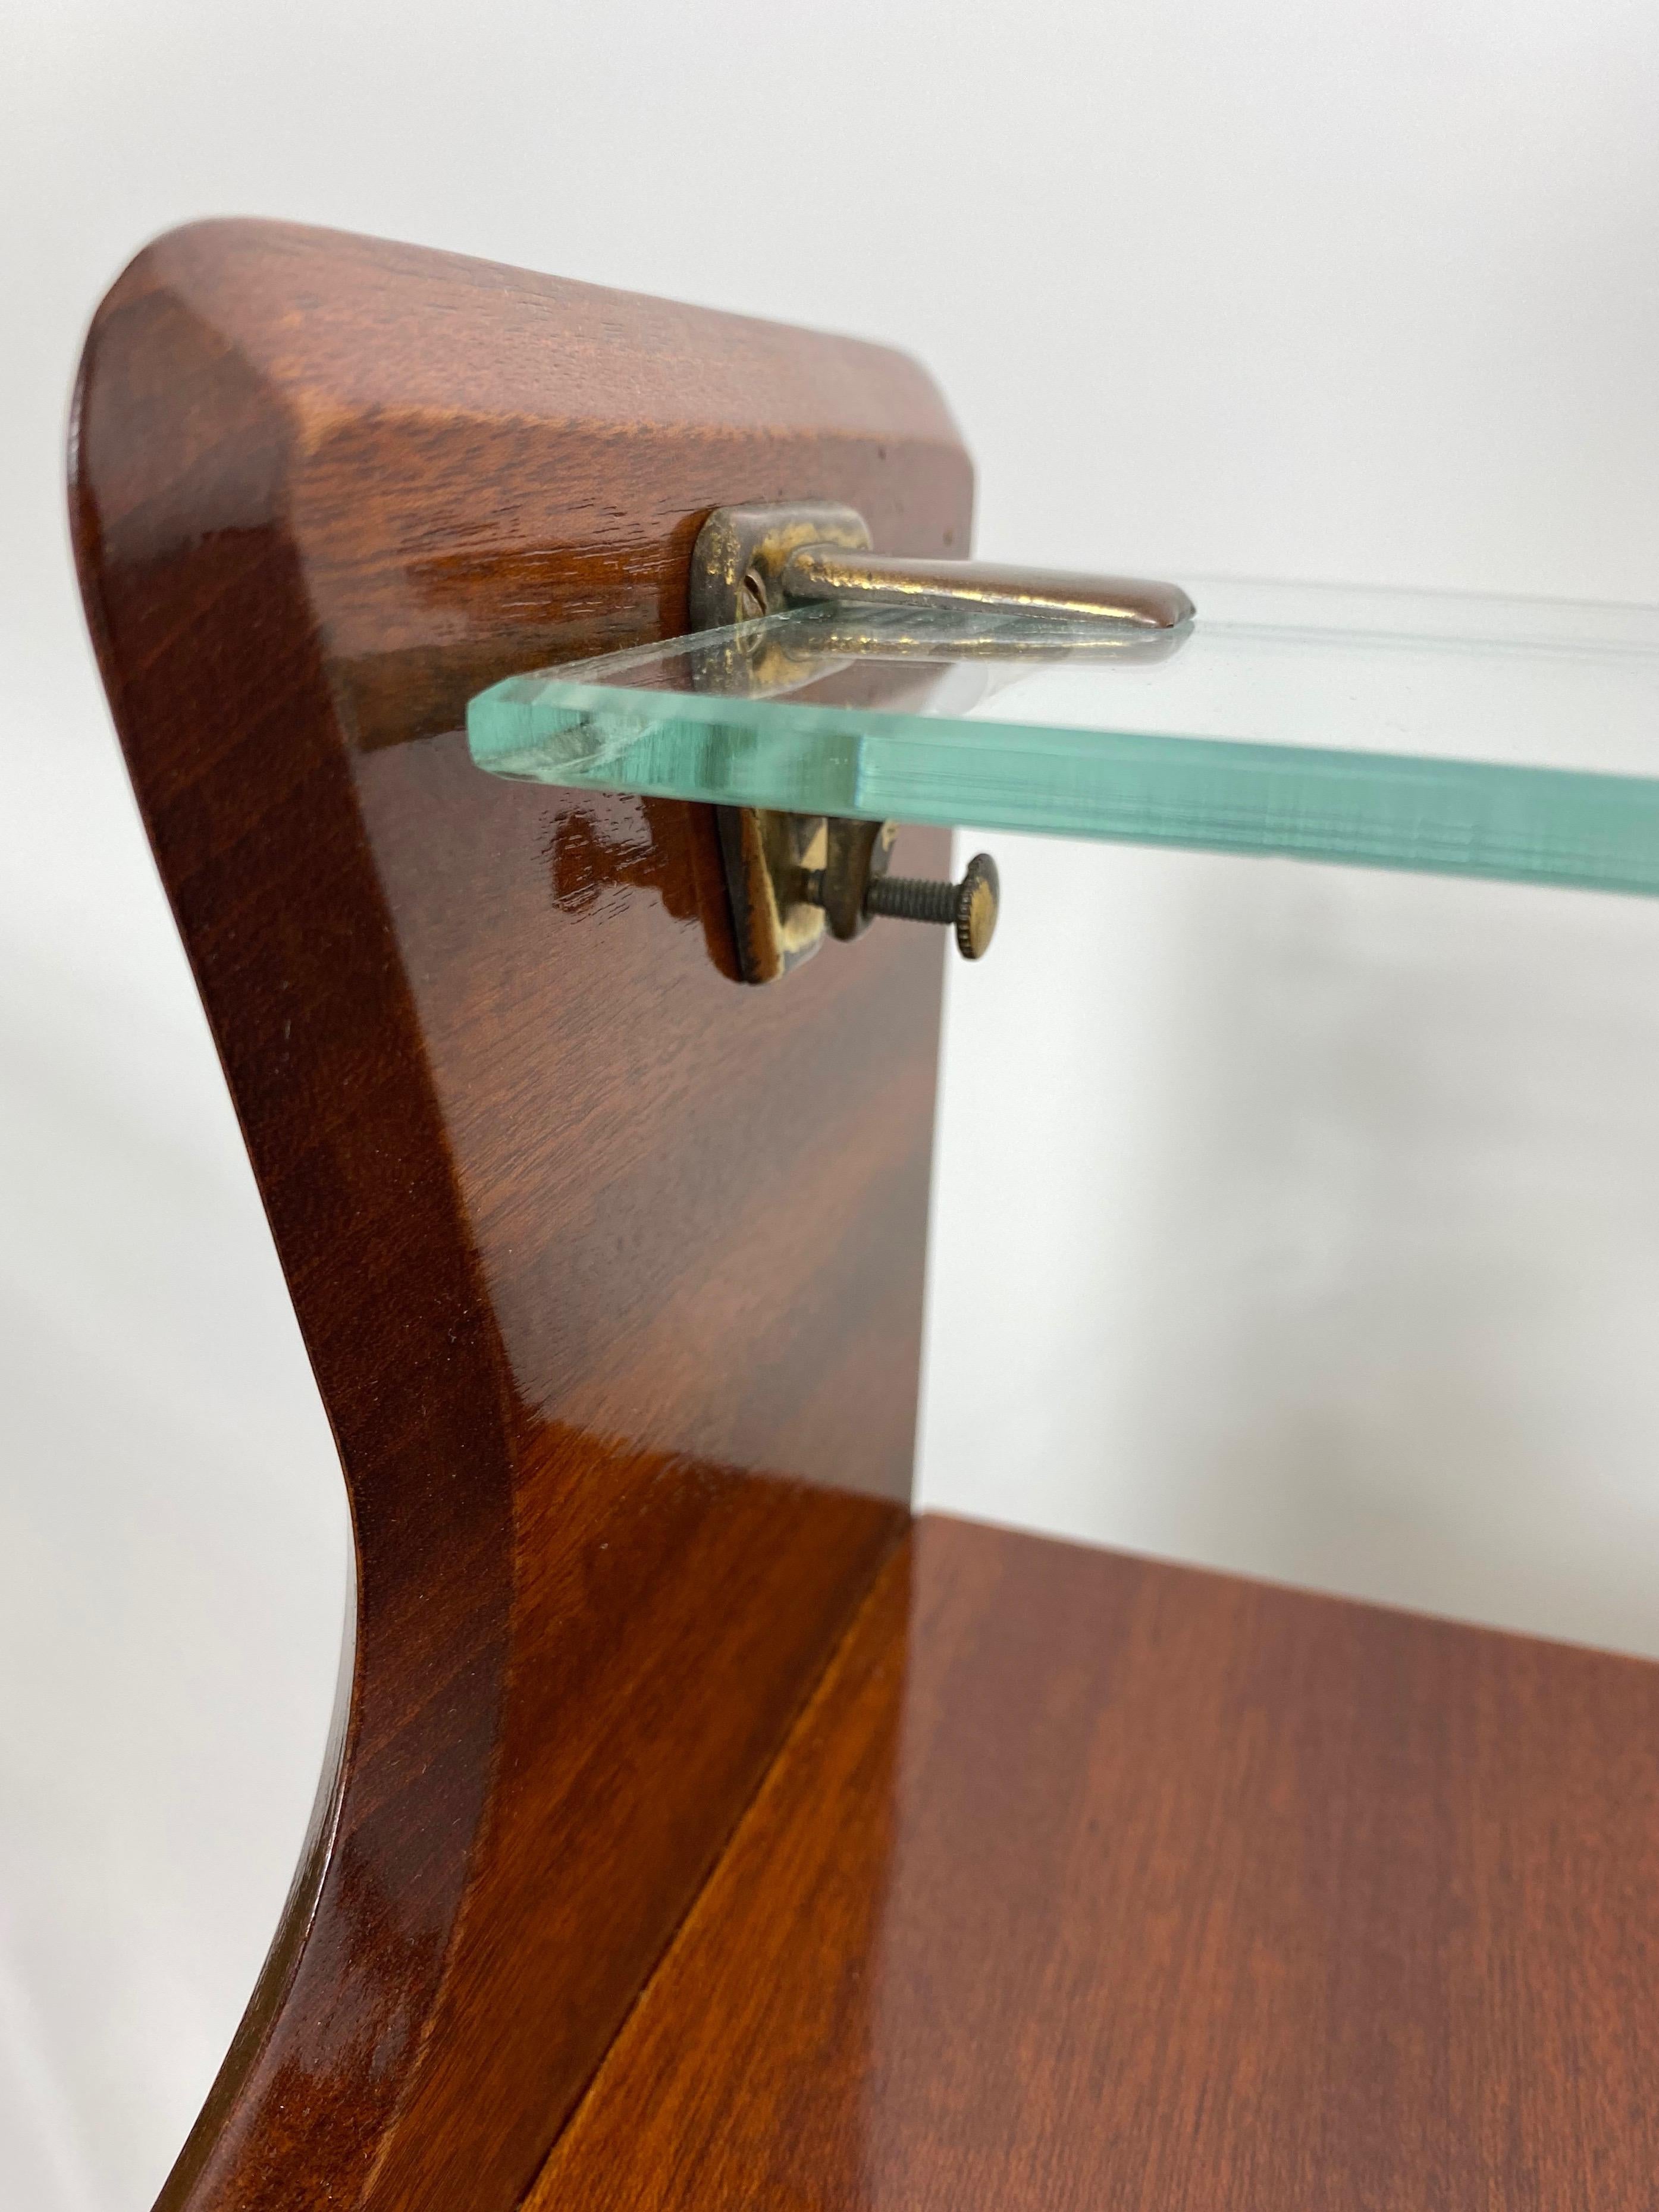 Italian Midcentury Mahogany Wood and Glass Console Table by Carlo de Carli 1950s For Sale 13